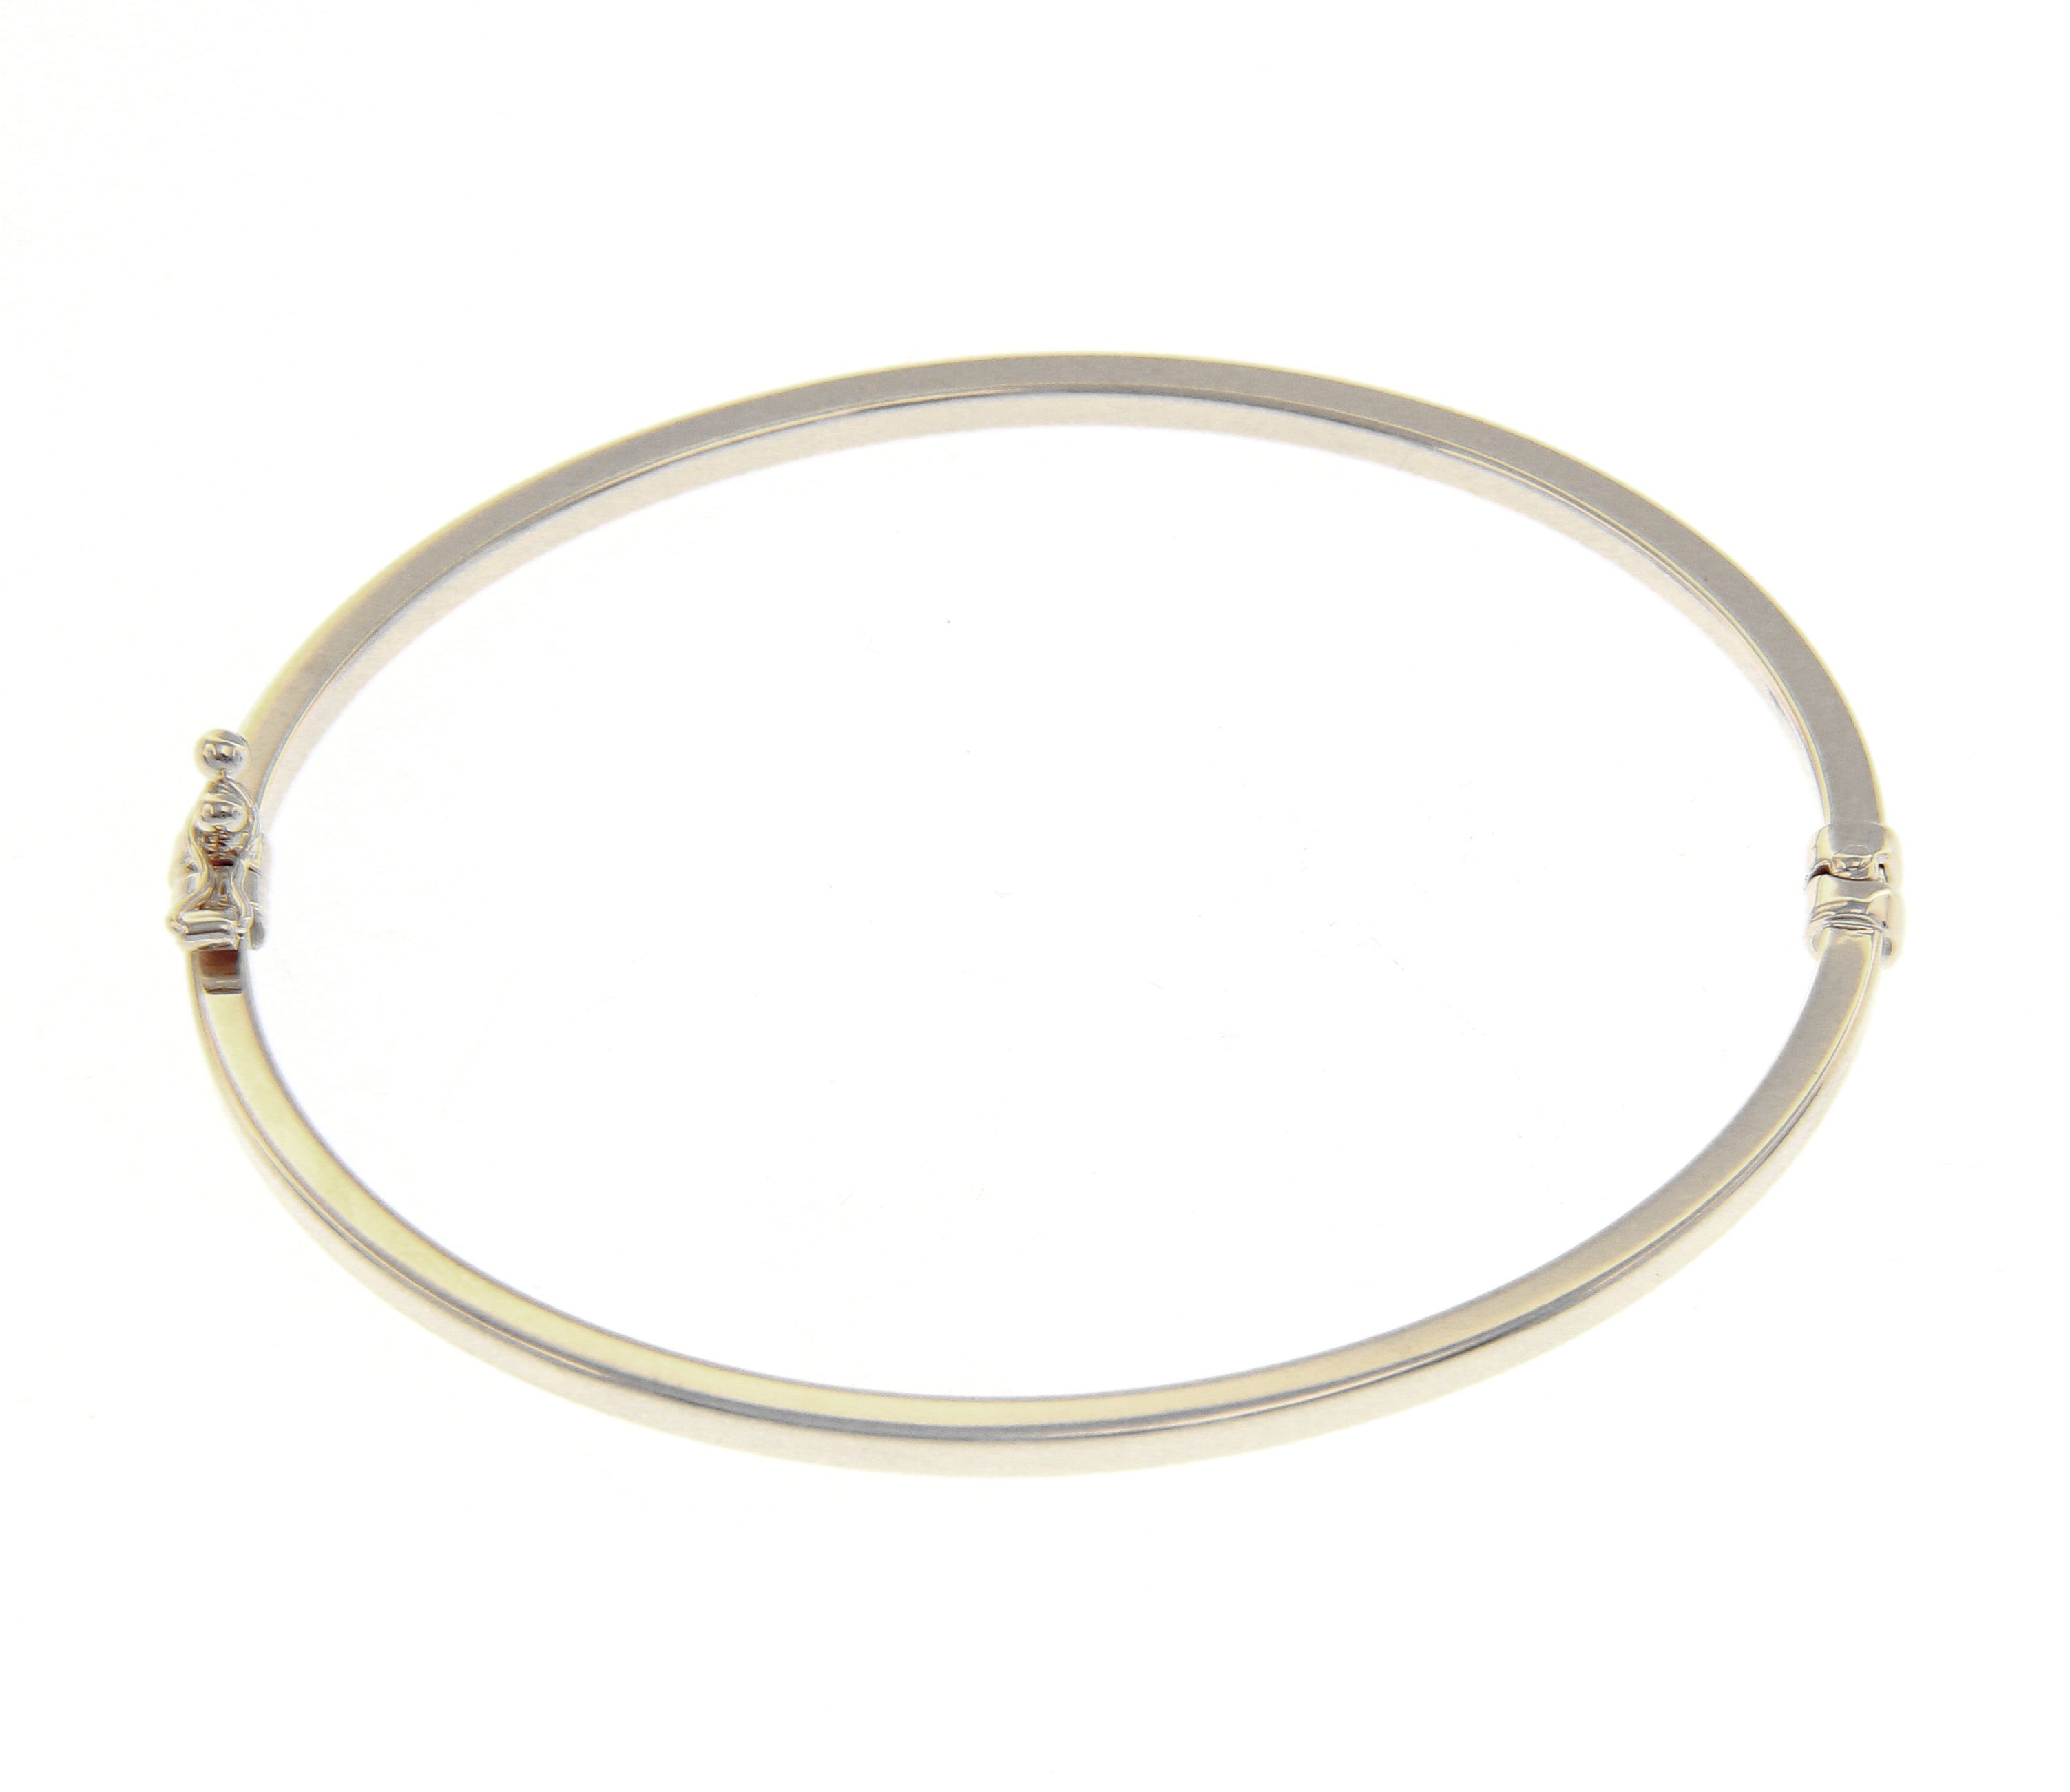 Rose gold oval bracelet with clasp k14 (code S219995)